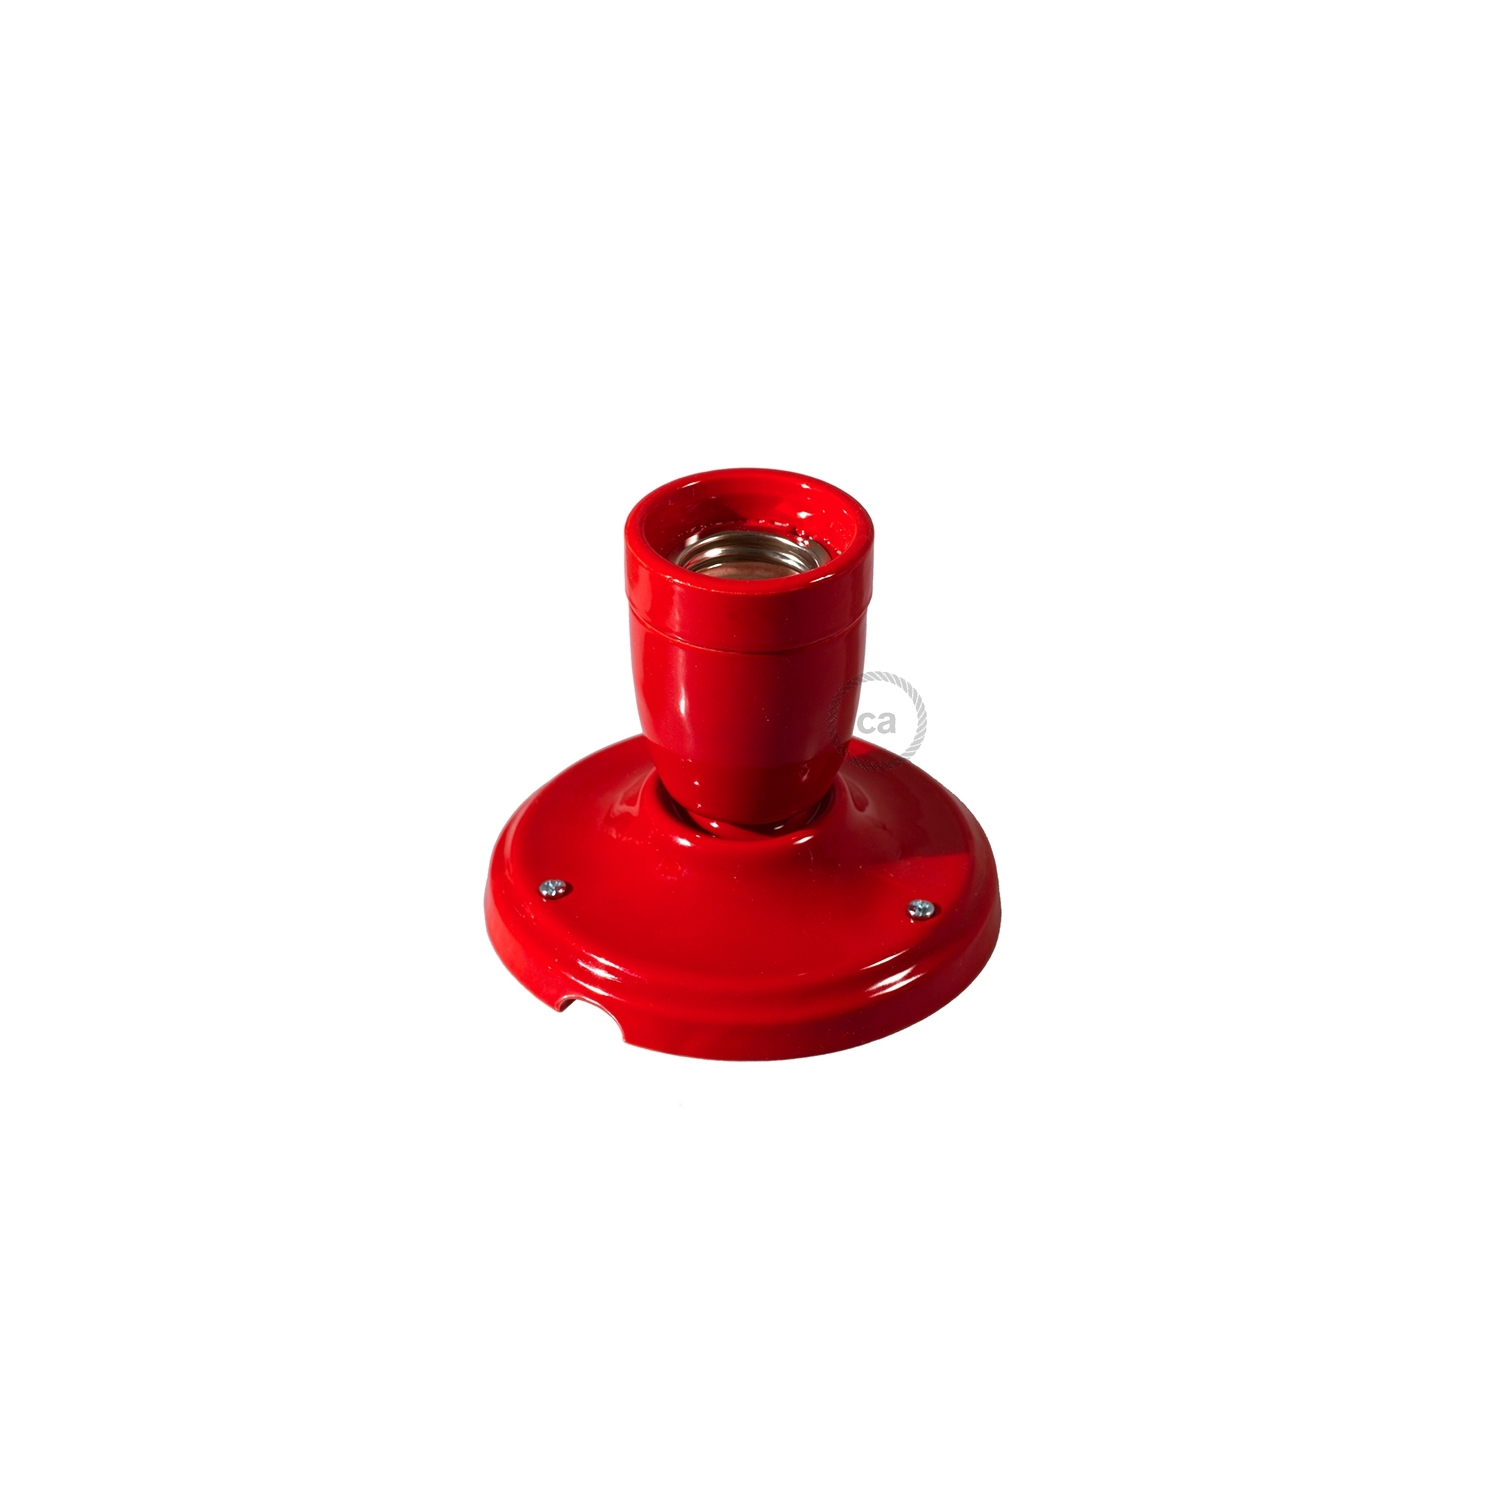 Fermaluce Classic, the wall or ceiling light source in red porcelain.